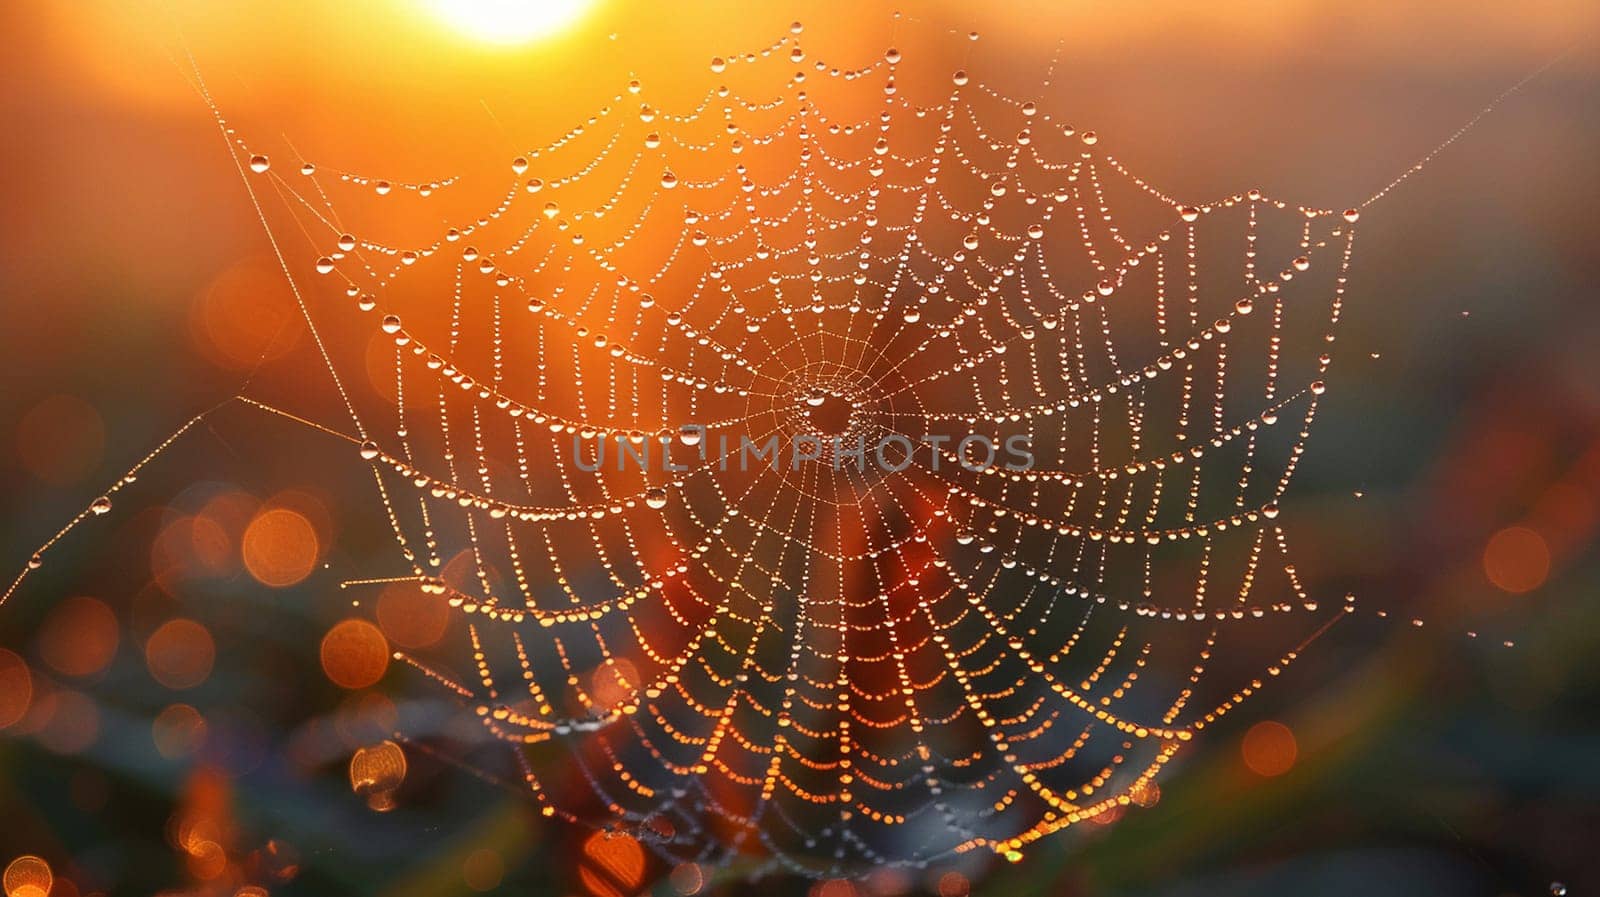 The intricate pattern of a spider's web at dawn, dewdrops sparkling